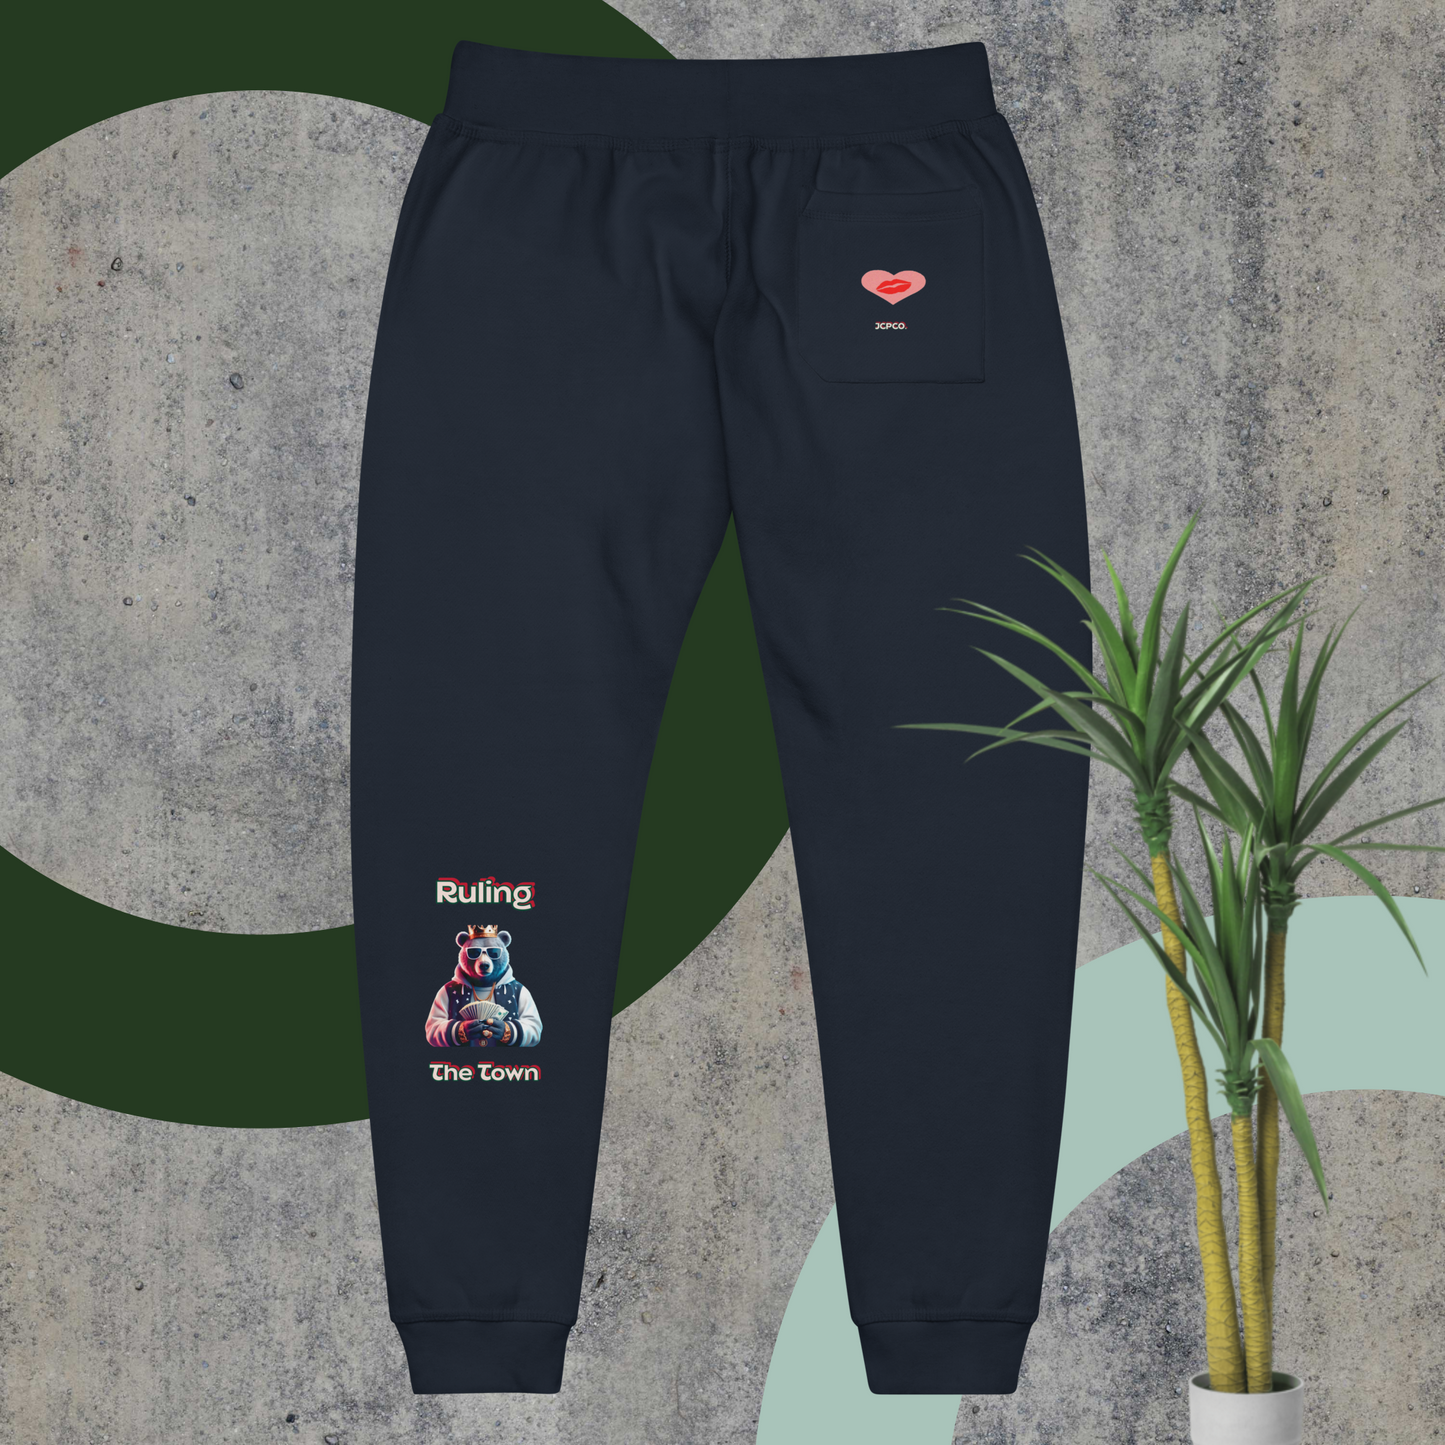 💕The Bear with Cash🐻💵 and a Crown Ruling the Town👑 Unisex fleece sweatpants👖